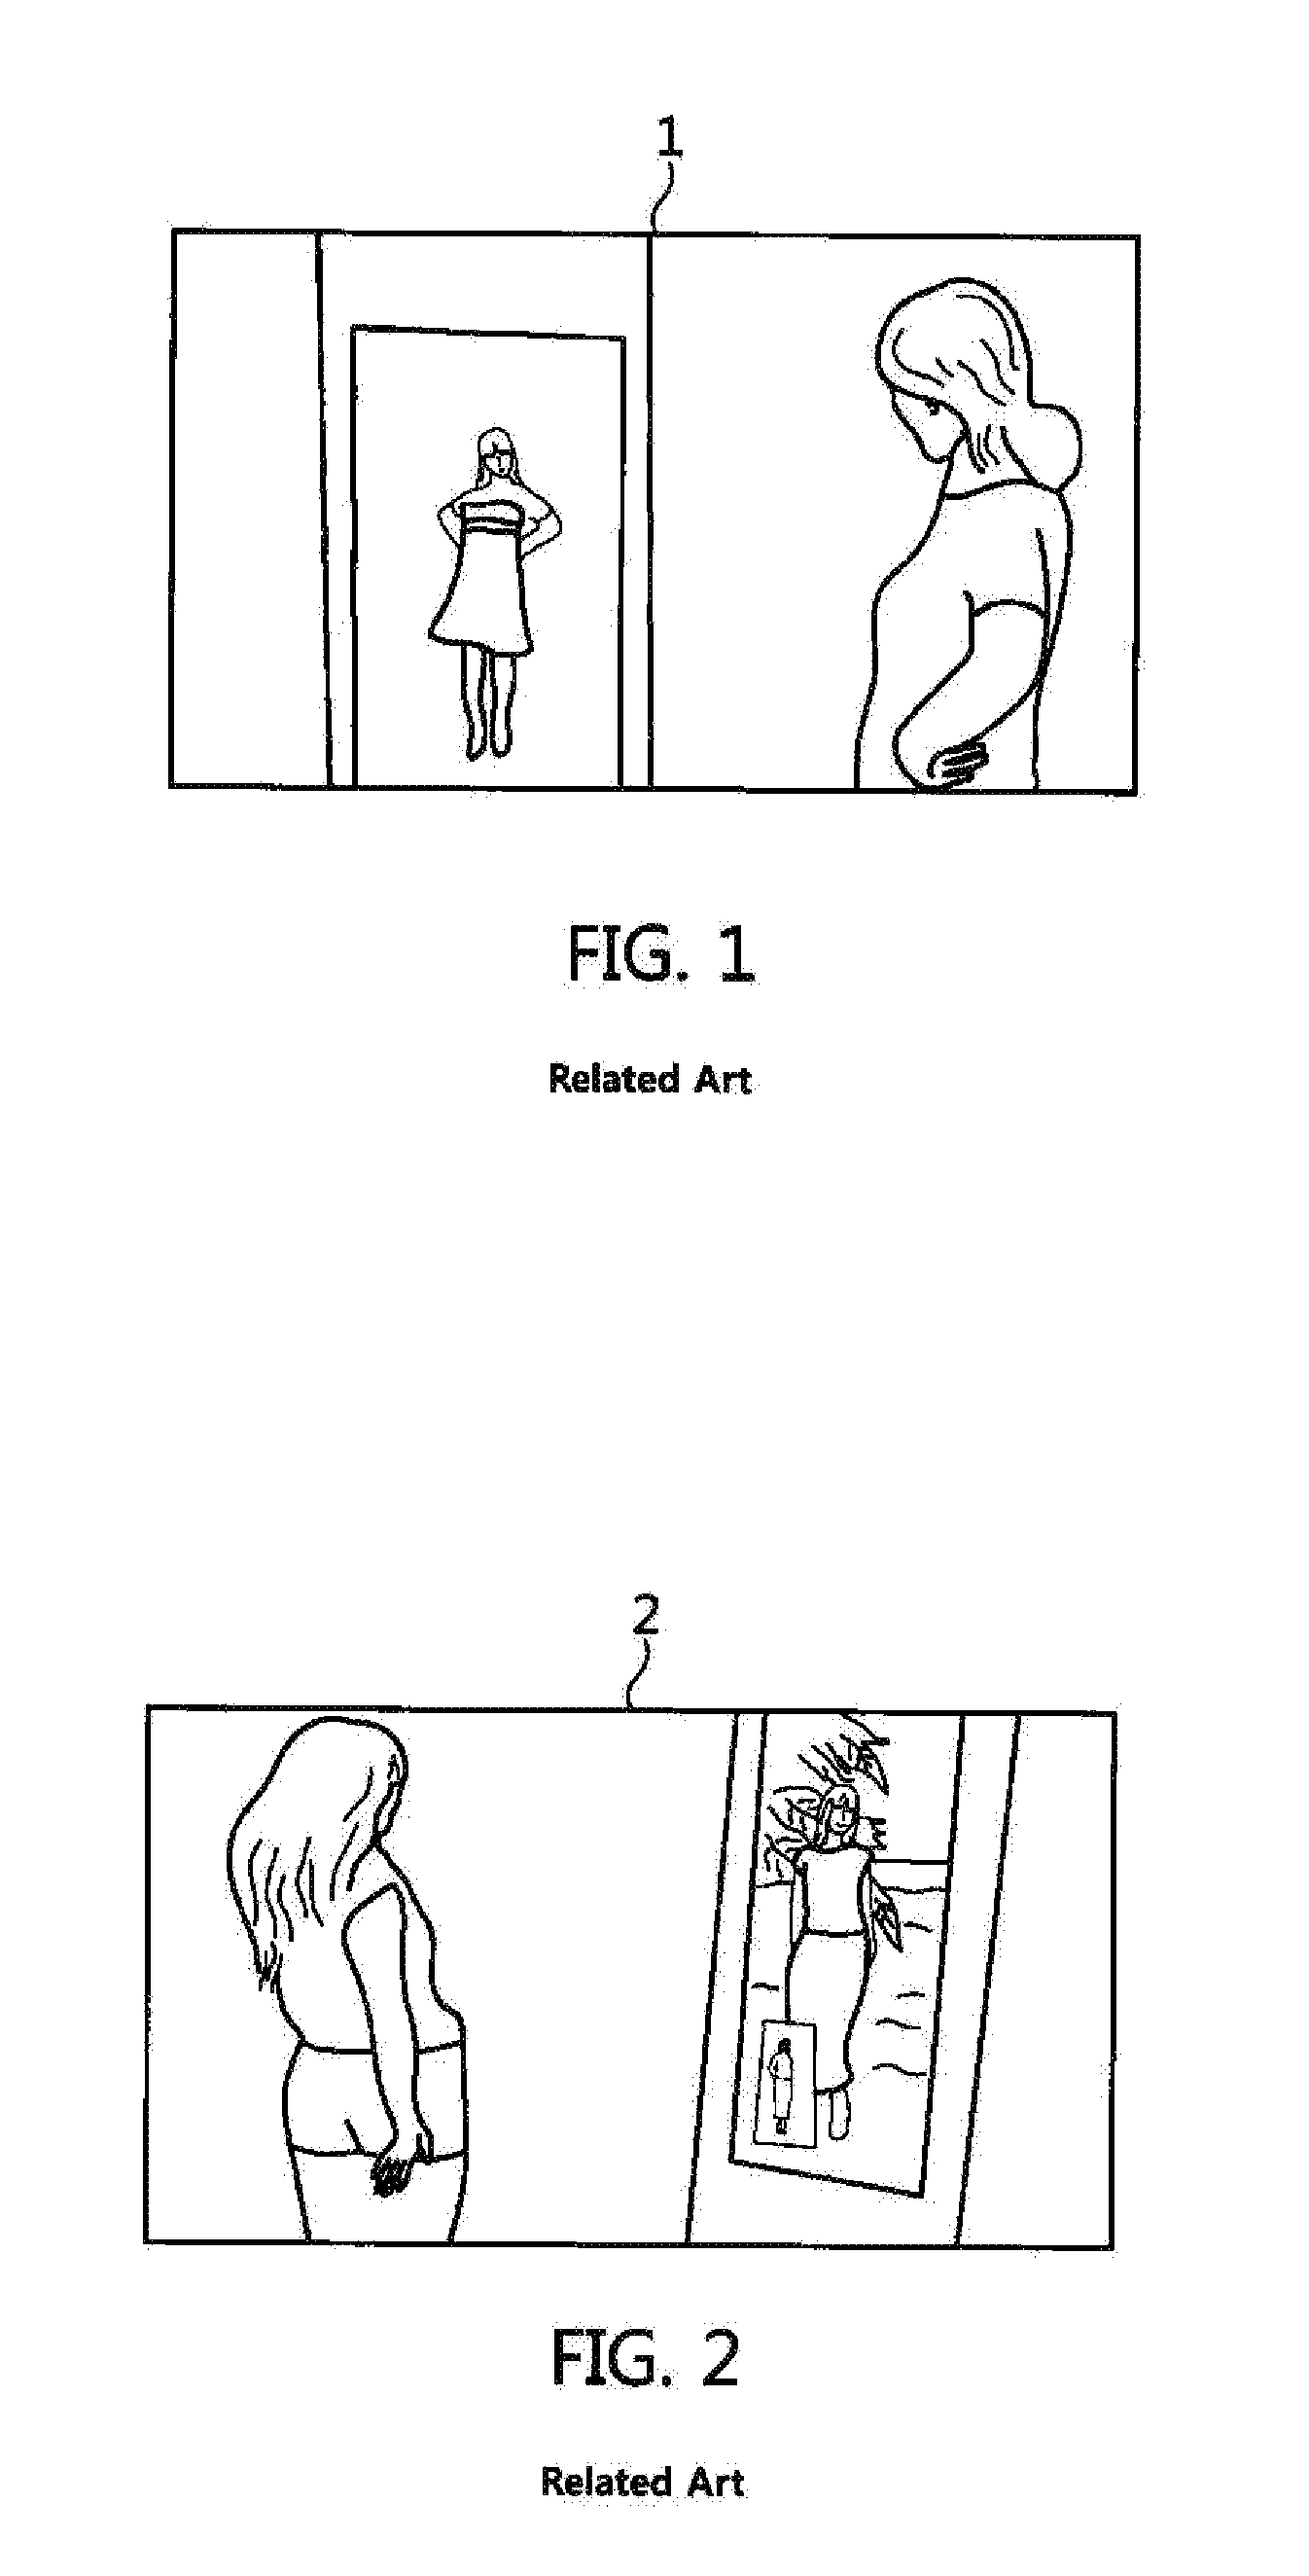 Apparatus and method for providing augmented reality-based realistic experience